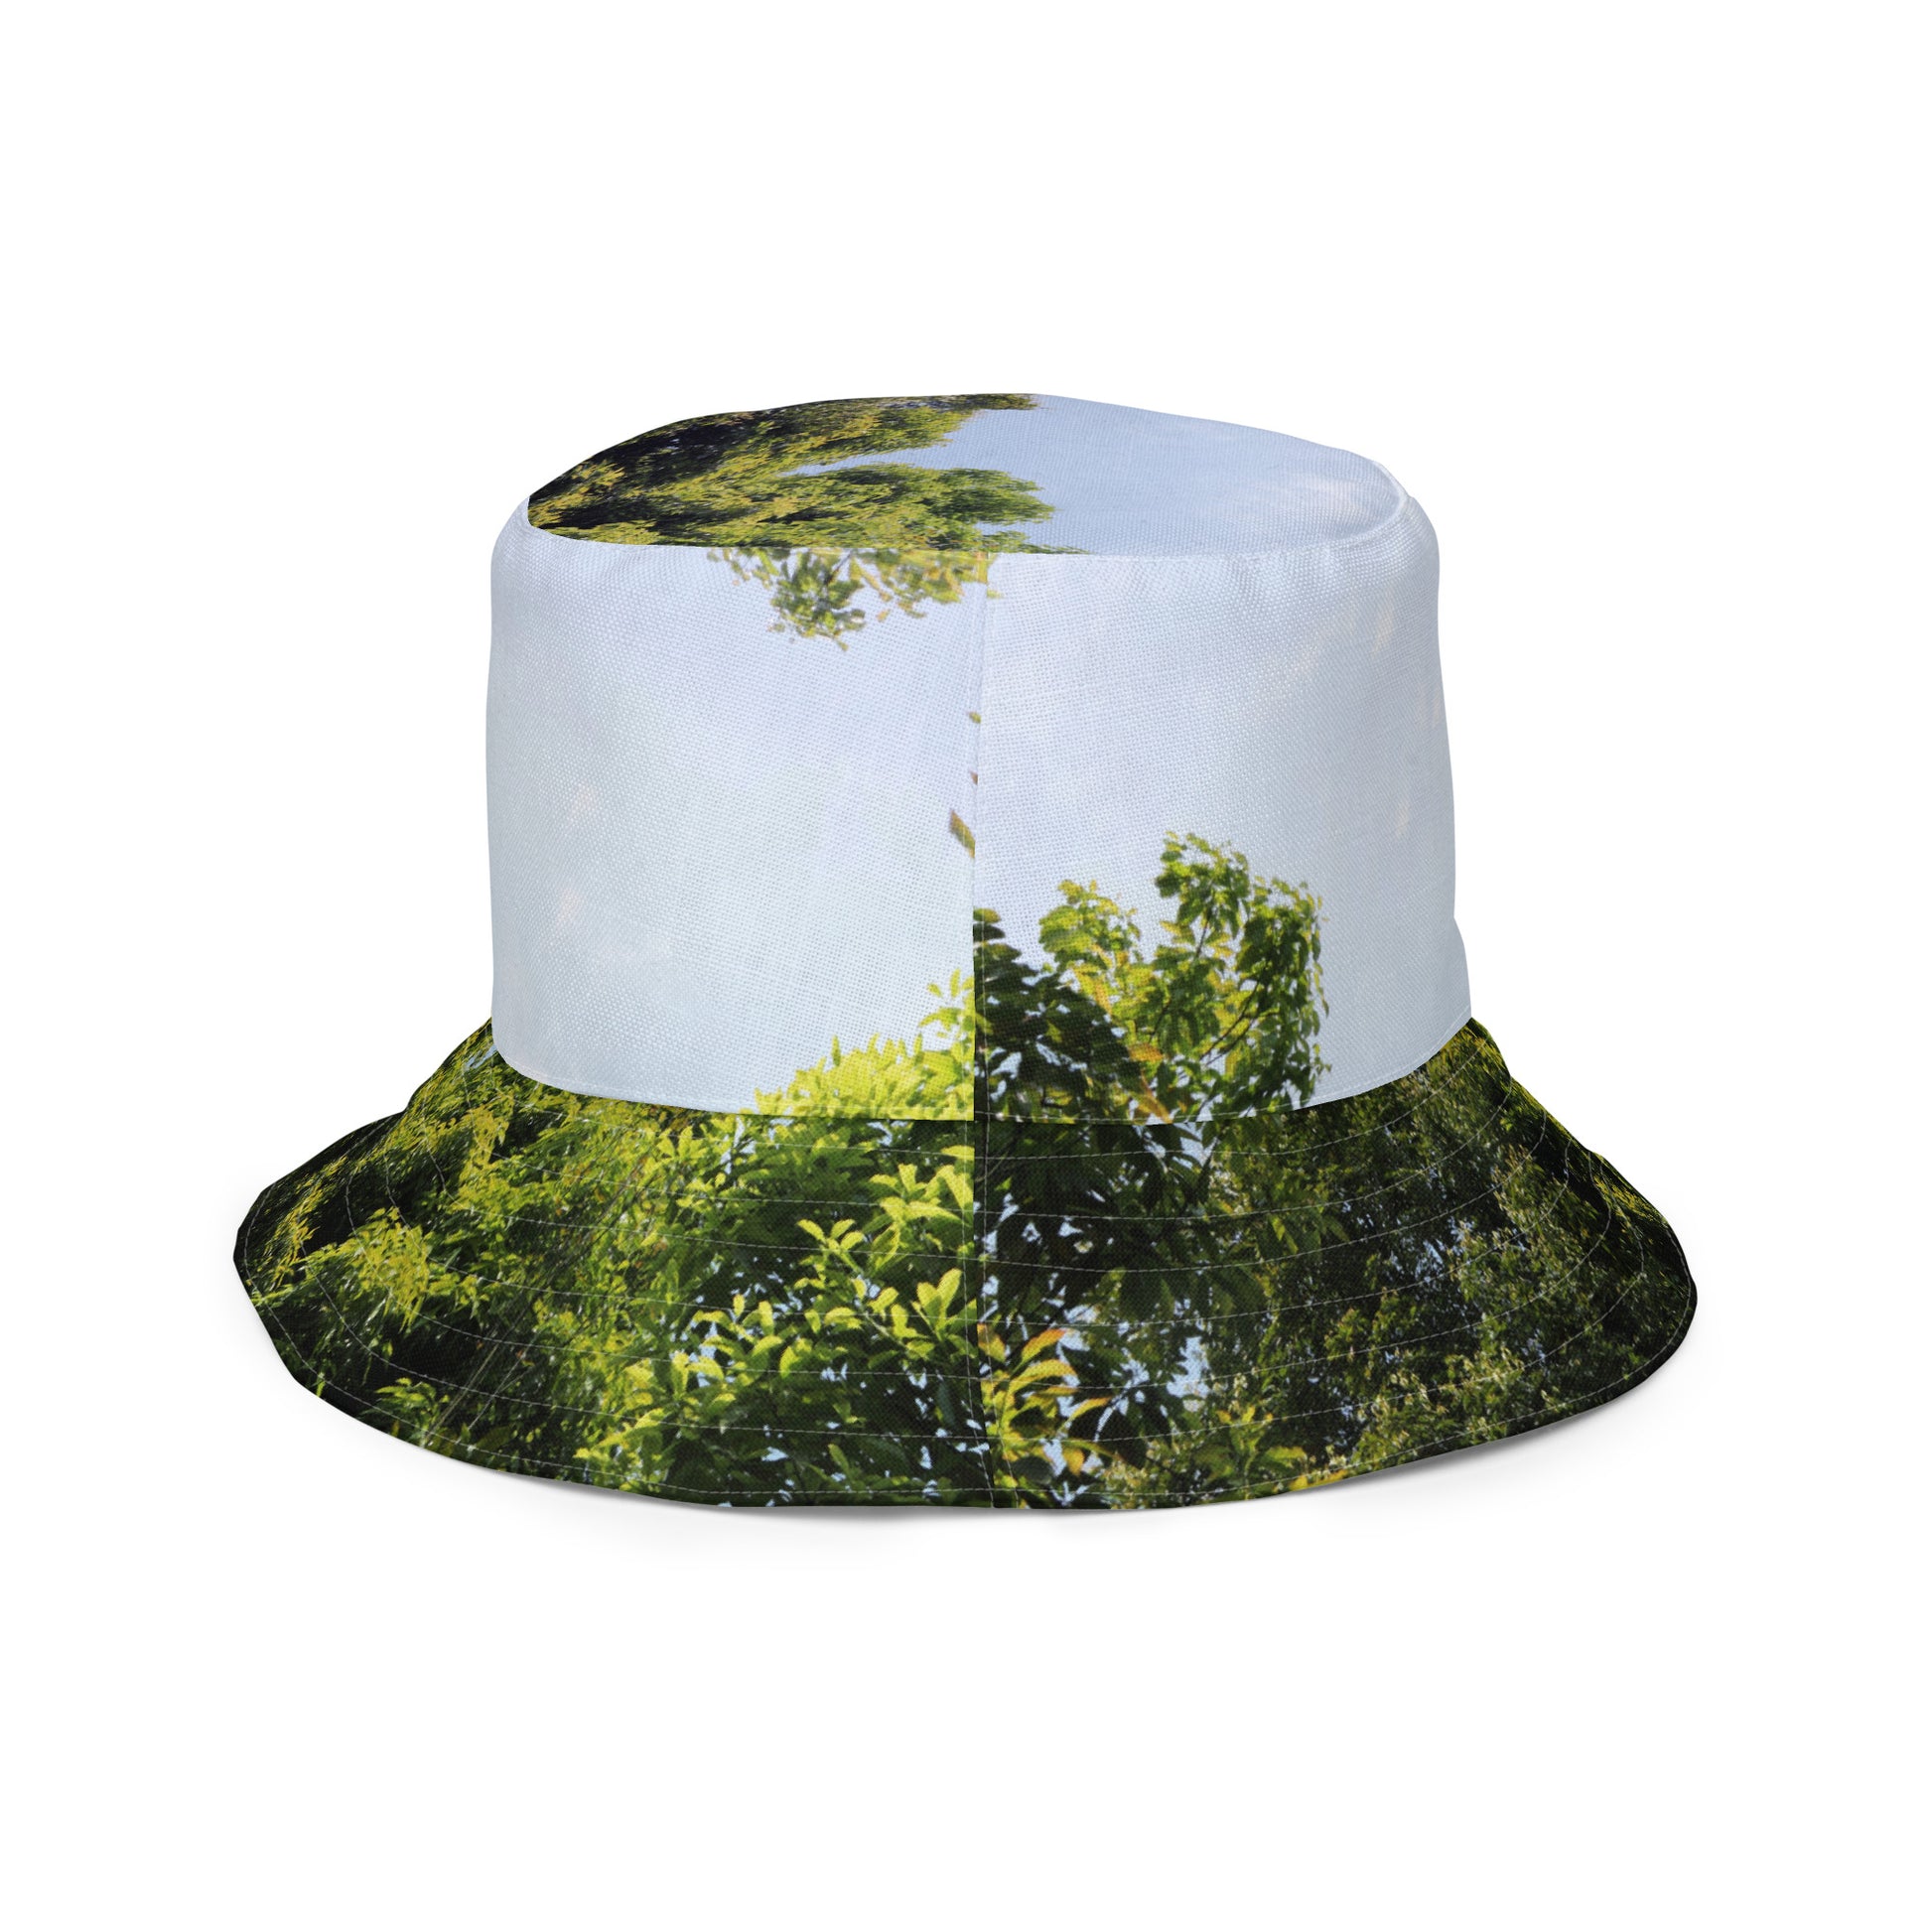 Reversible bucket hat, men, women, fashion style, outfits, gift